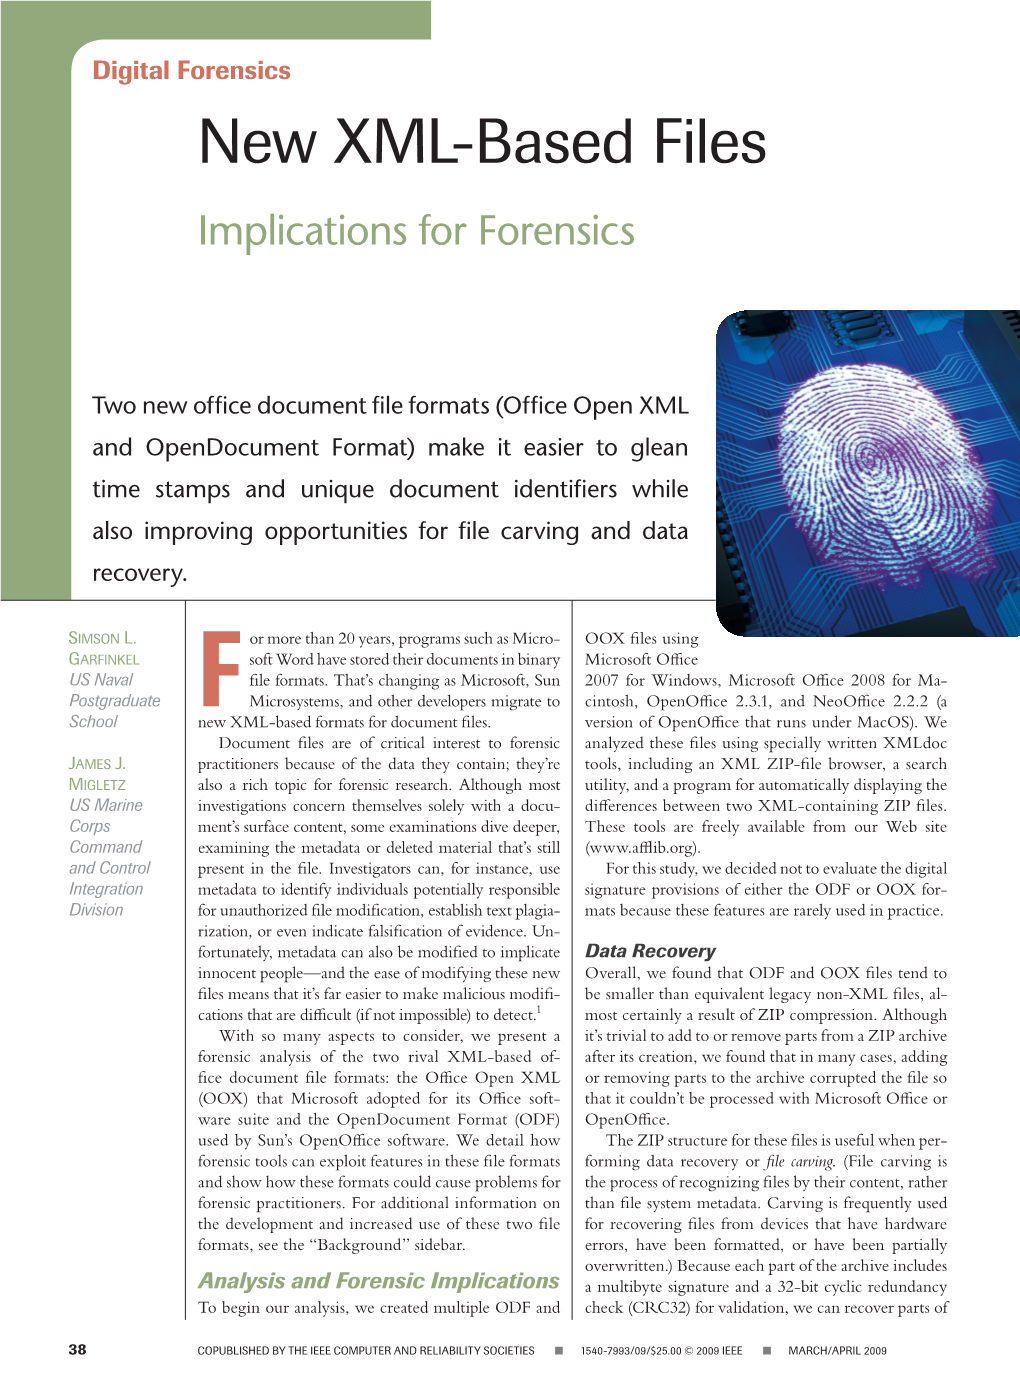 New XML-Based Files Implications for Forensics